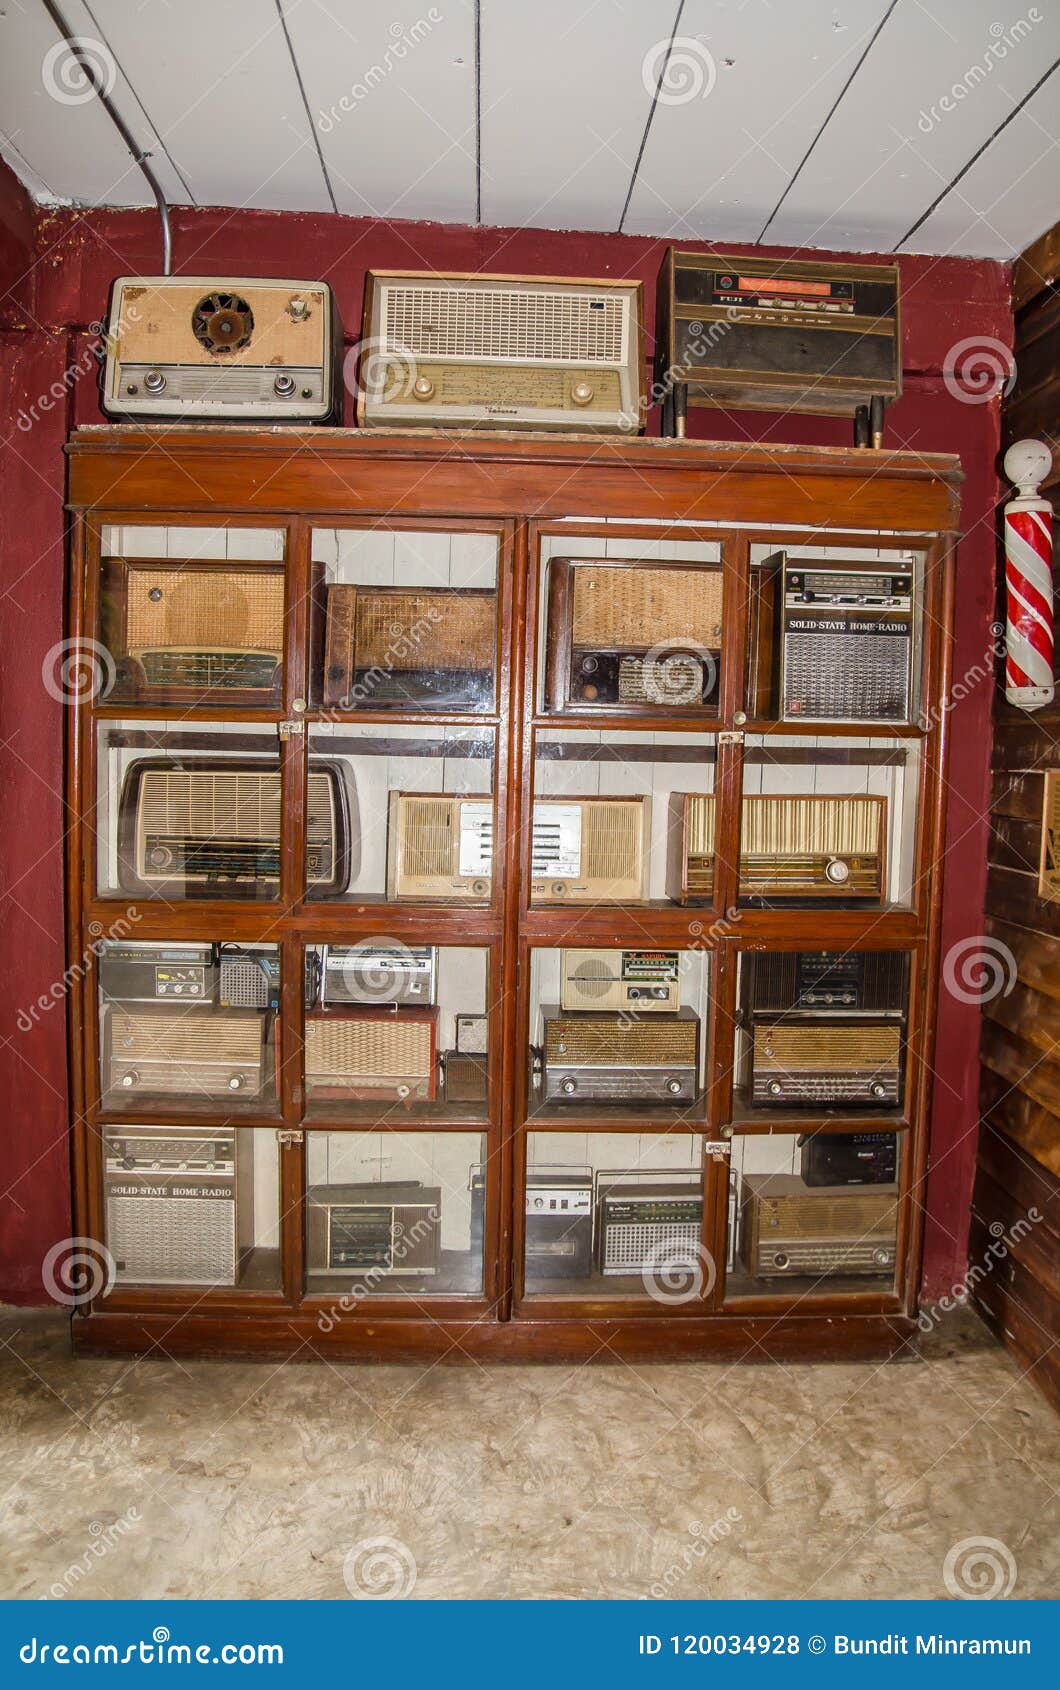 Vintage Old Radios Collection Displaying At Antique Museum Ban